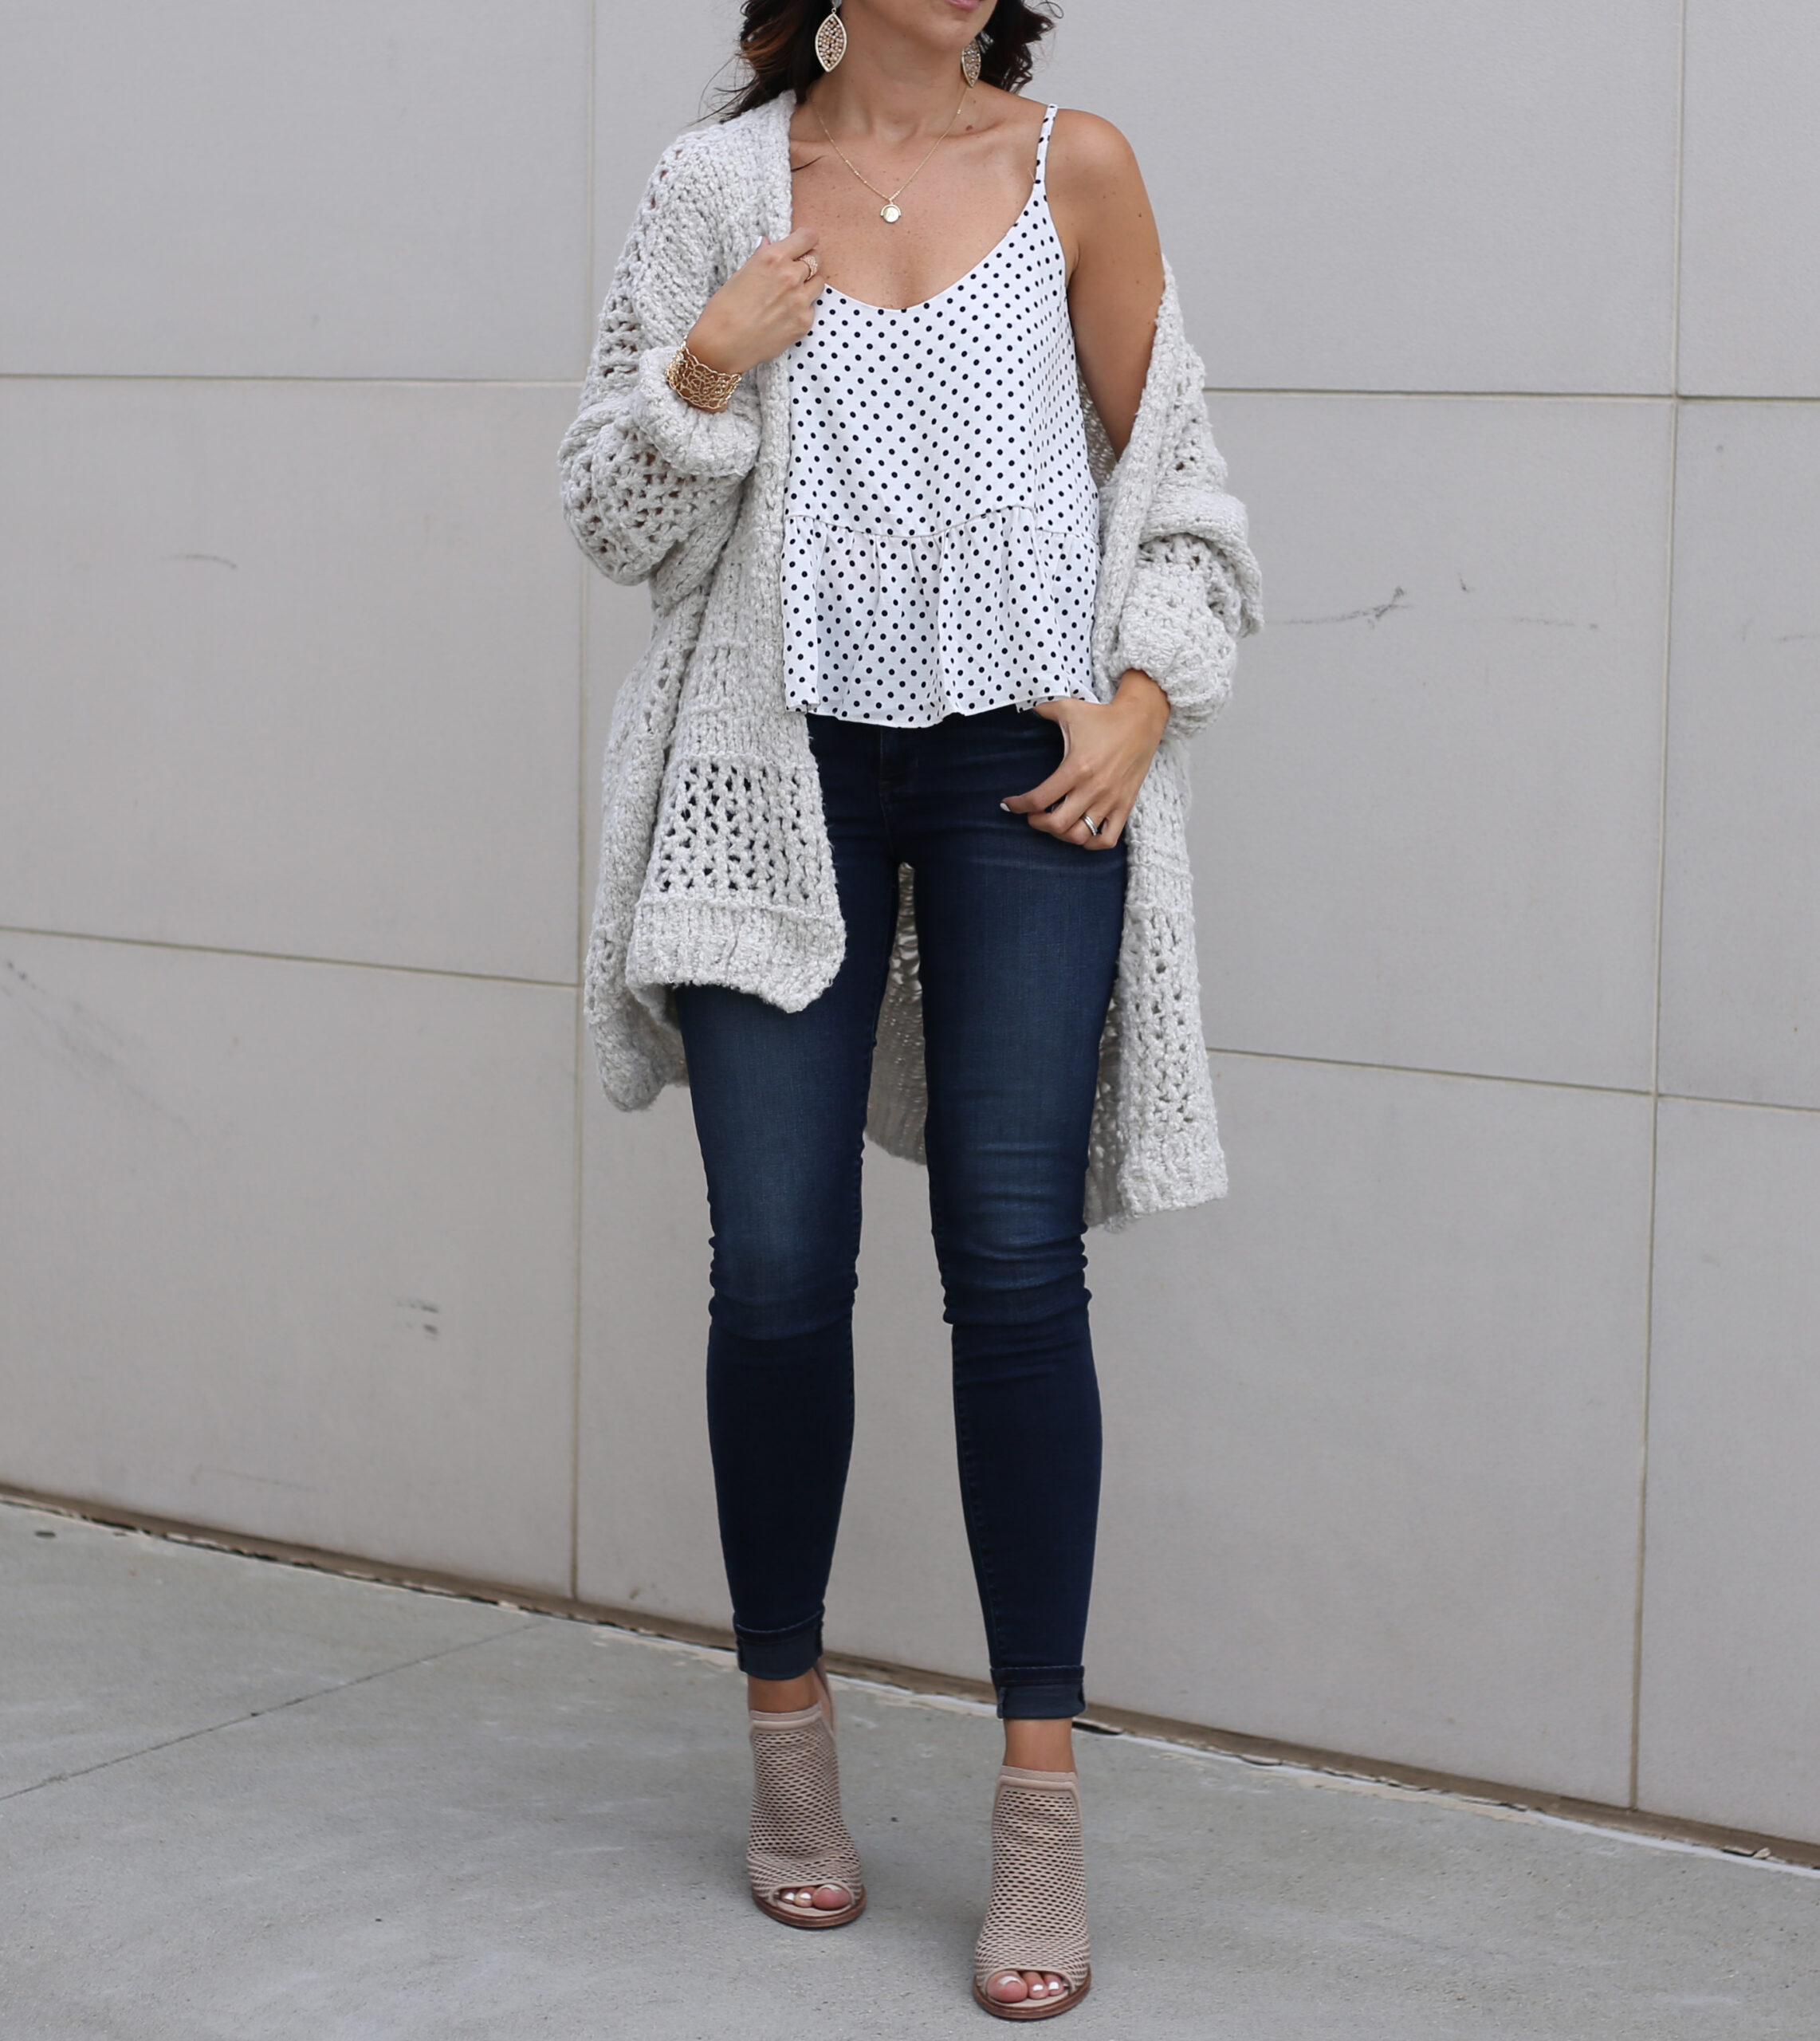 fashion blogger Anna Monteiro of blushing rose style fashion blog wearing perfect fall cardigans and KUT from the Kloth skinny jeans from Nordstrom